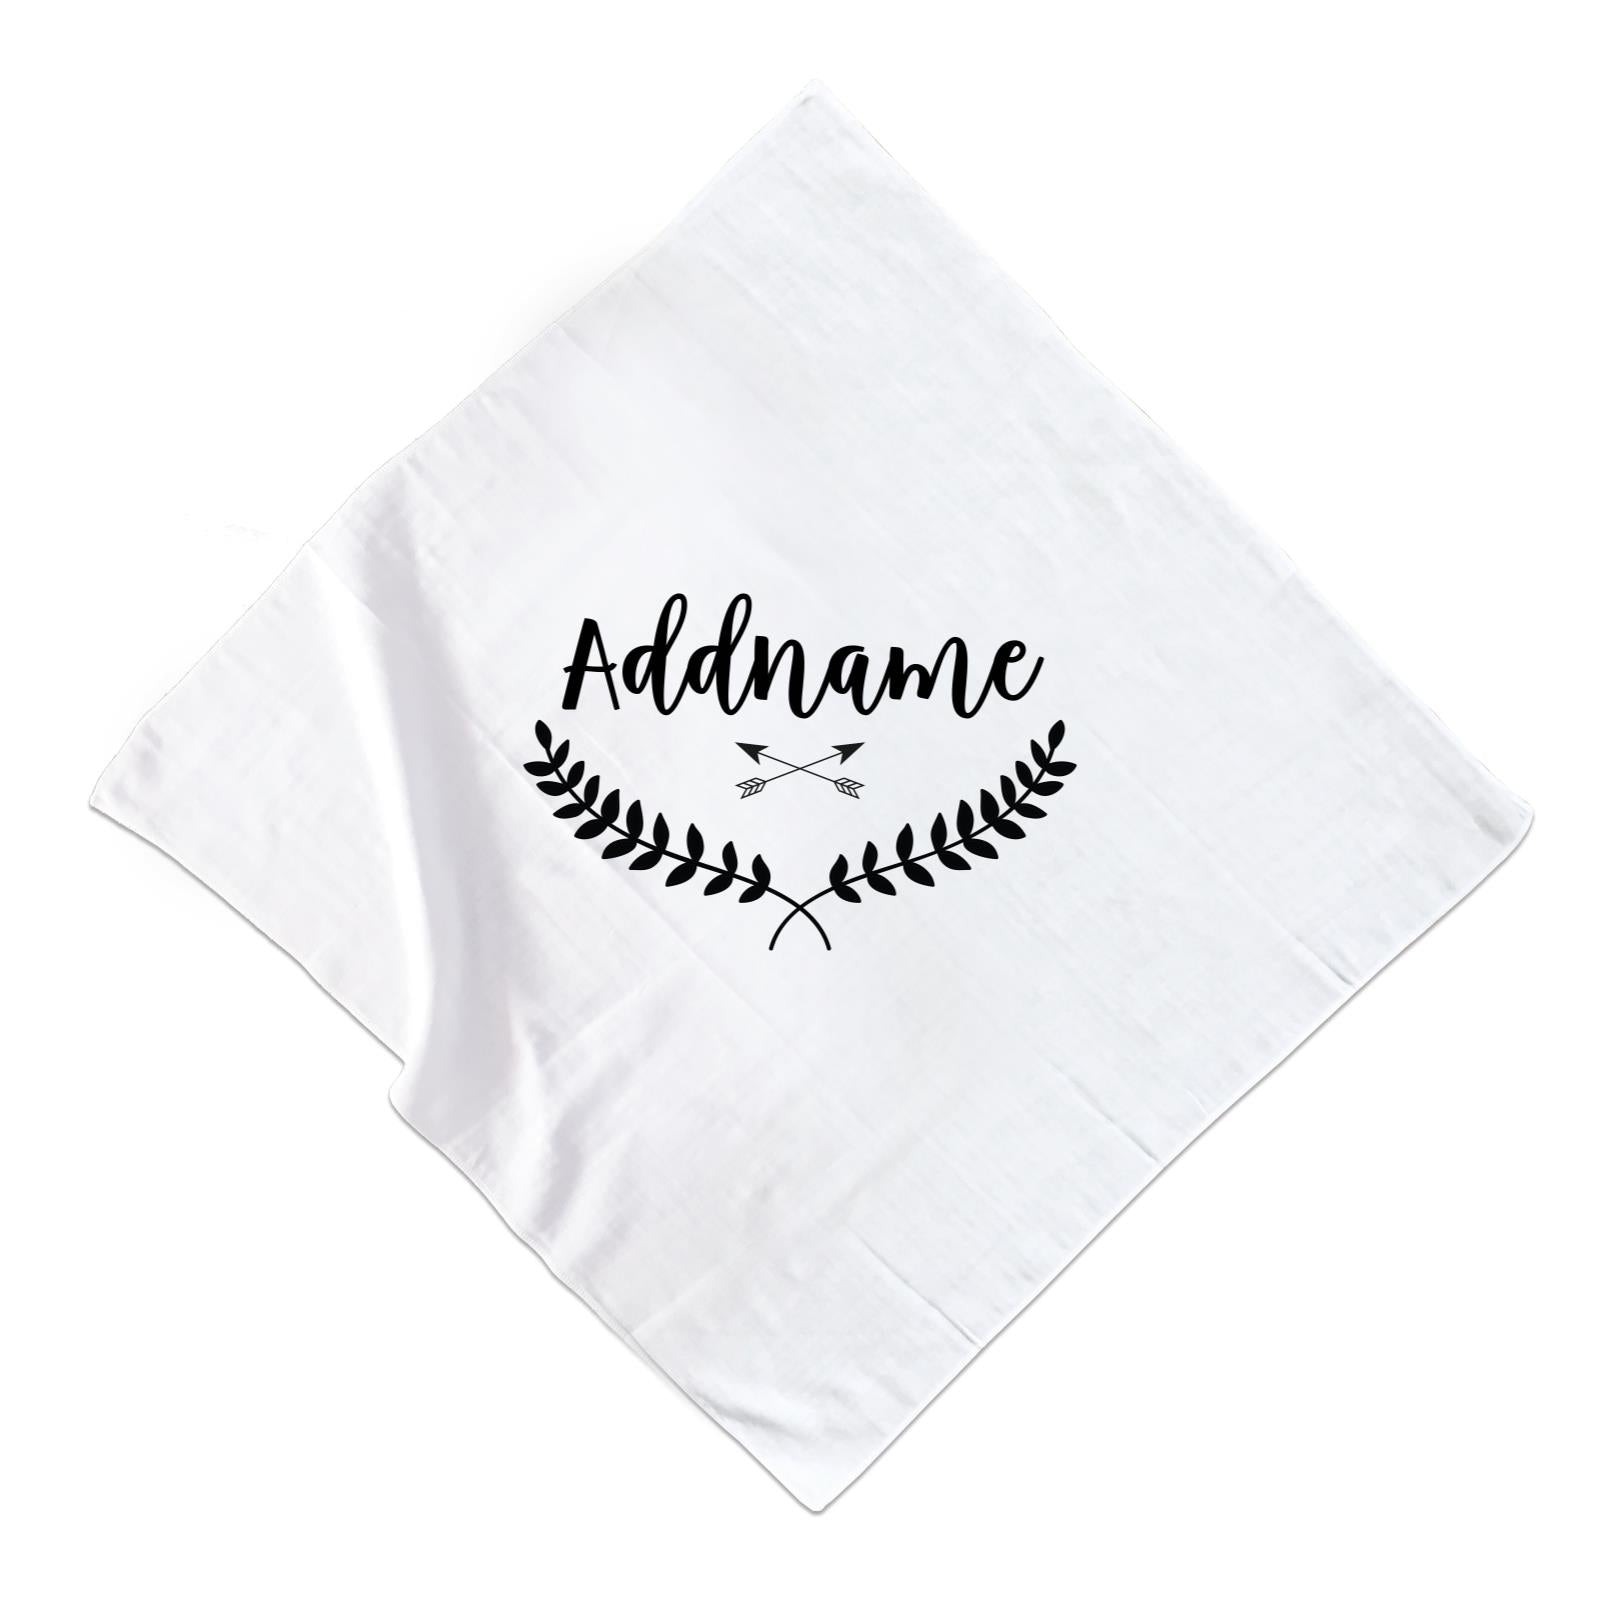 Monochrome Leave Crown and Arrows Addname Muslin Muslin Square